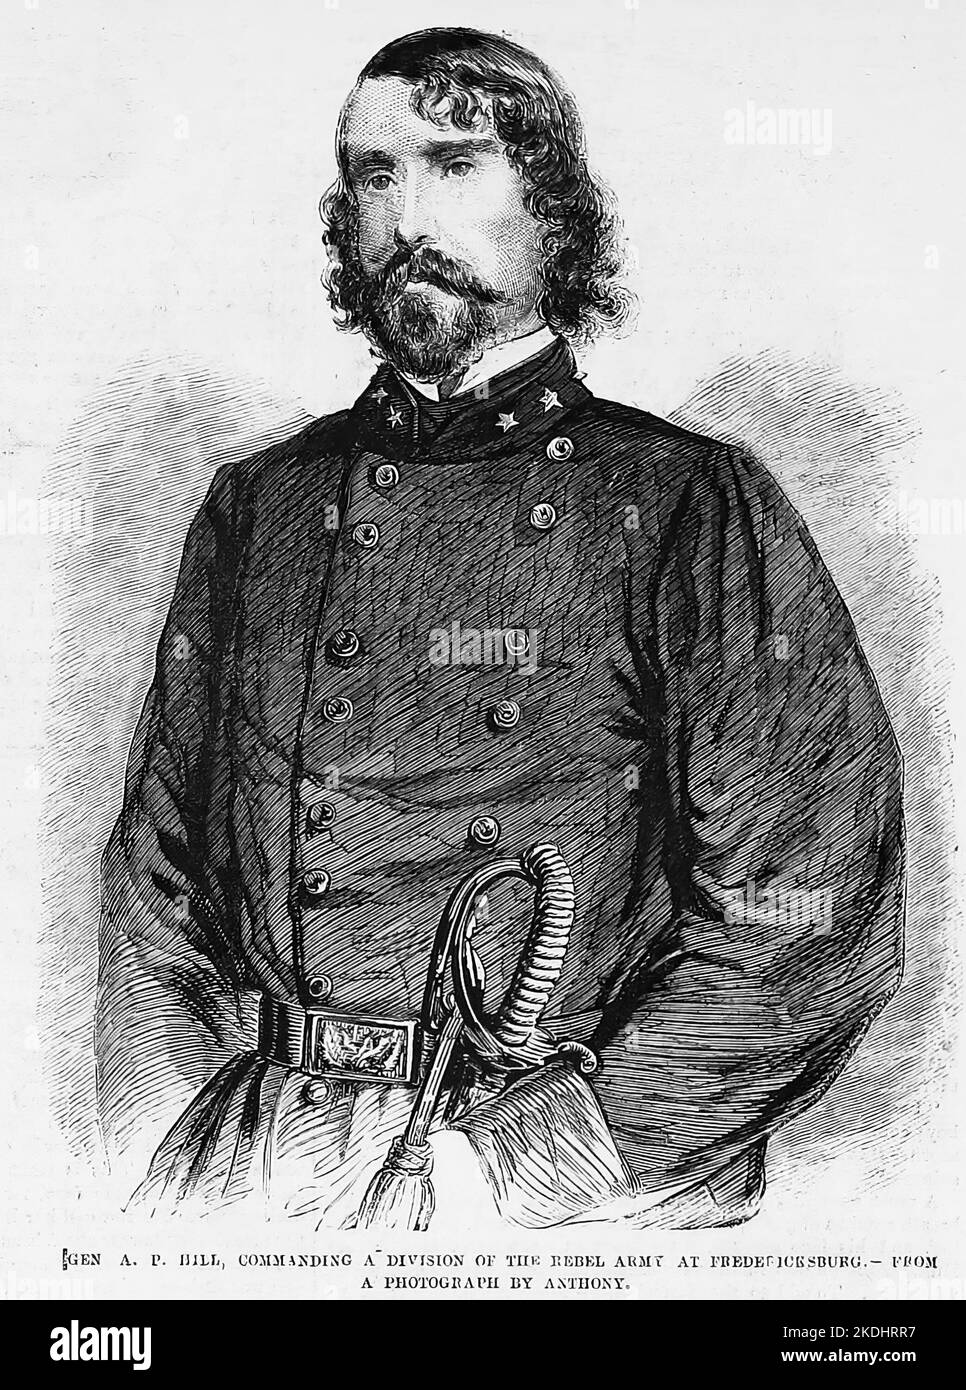 Portrait of General Ambrose Powell Hill Jr., commanding a division of the Rebel army at Fredericksburg. 1862. 19th century American Civil War illustration from Frank Leslie's Illustrated Newspaper Stock Photo